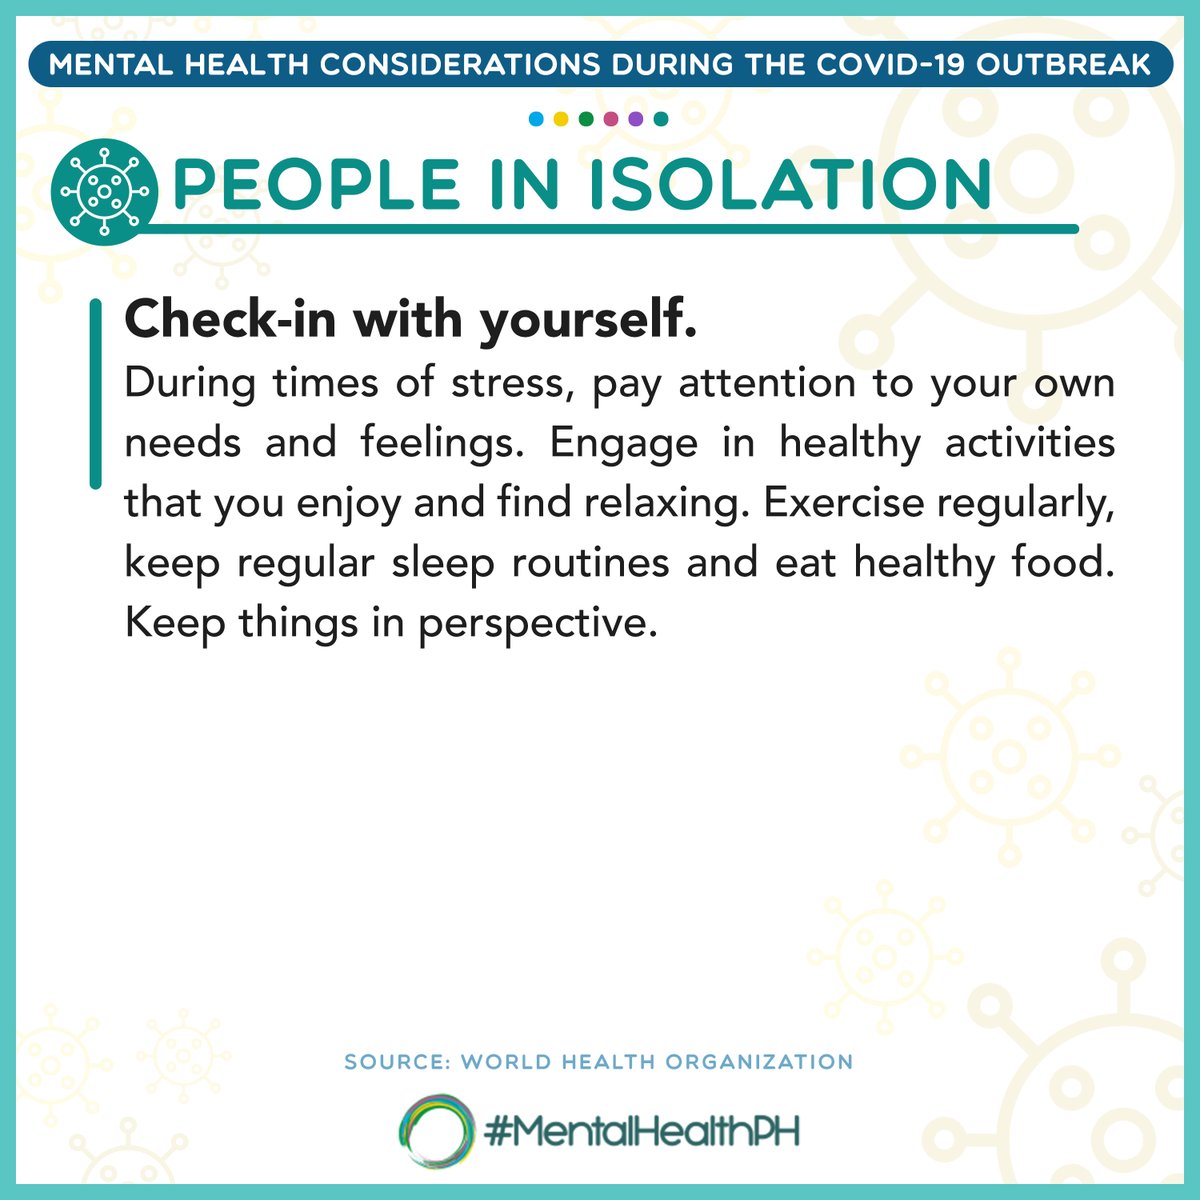 [Mental Health Considerations during COVID-19 Outbreak]For People in Isolation #MentalHealthPH  #COVID19(Source:  @WHO) @WHOPhilippines  @gospeakyourmind  @UnitedGMH